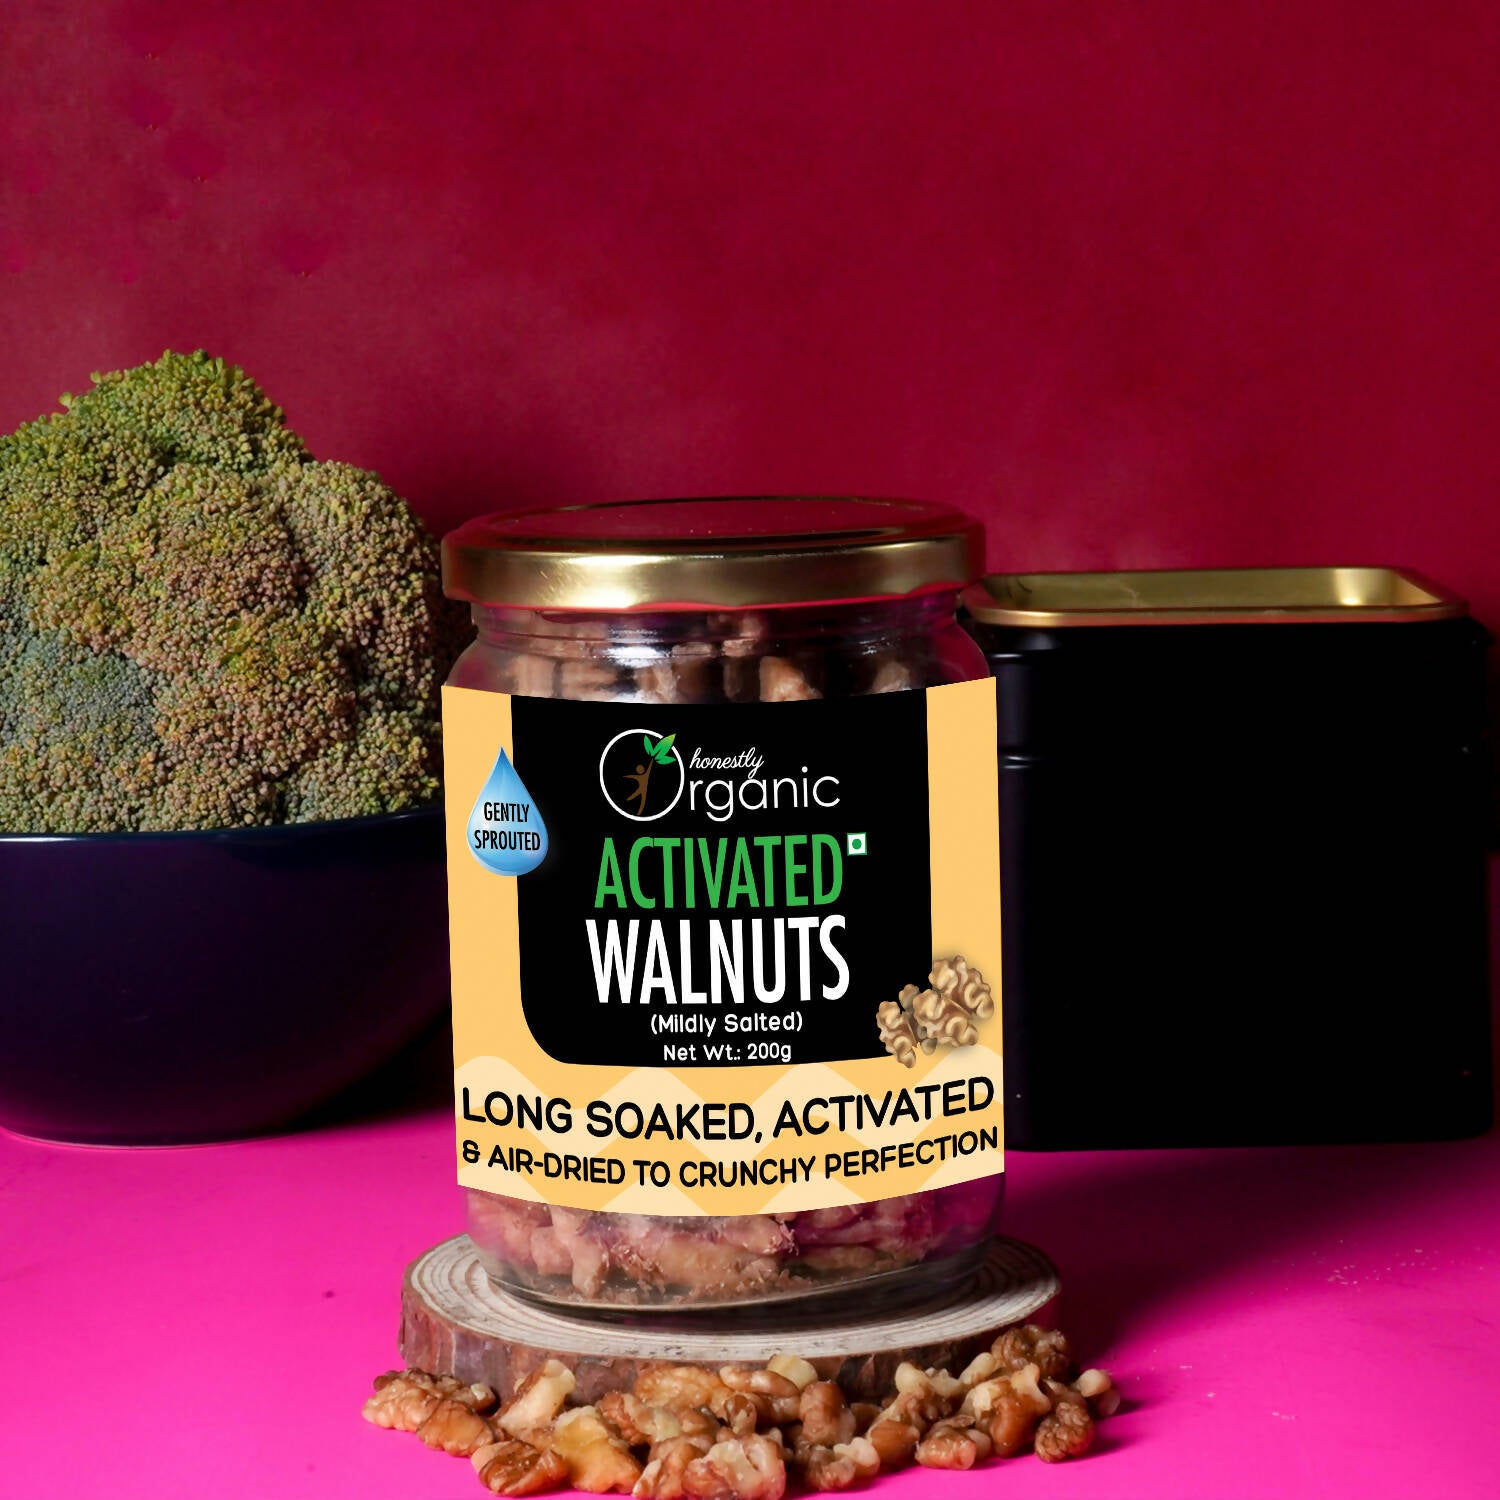 "Activated/Sprouted Walnuts - Mildly Salted (100% Natural, Long Soaked & Air Dried to Crunchy Perfection) - 200g "